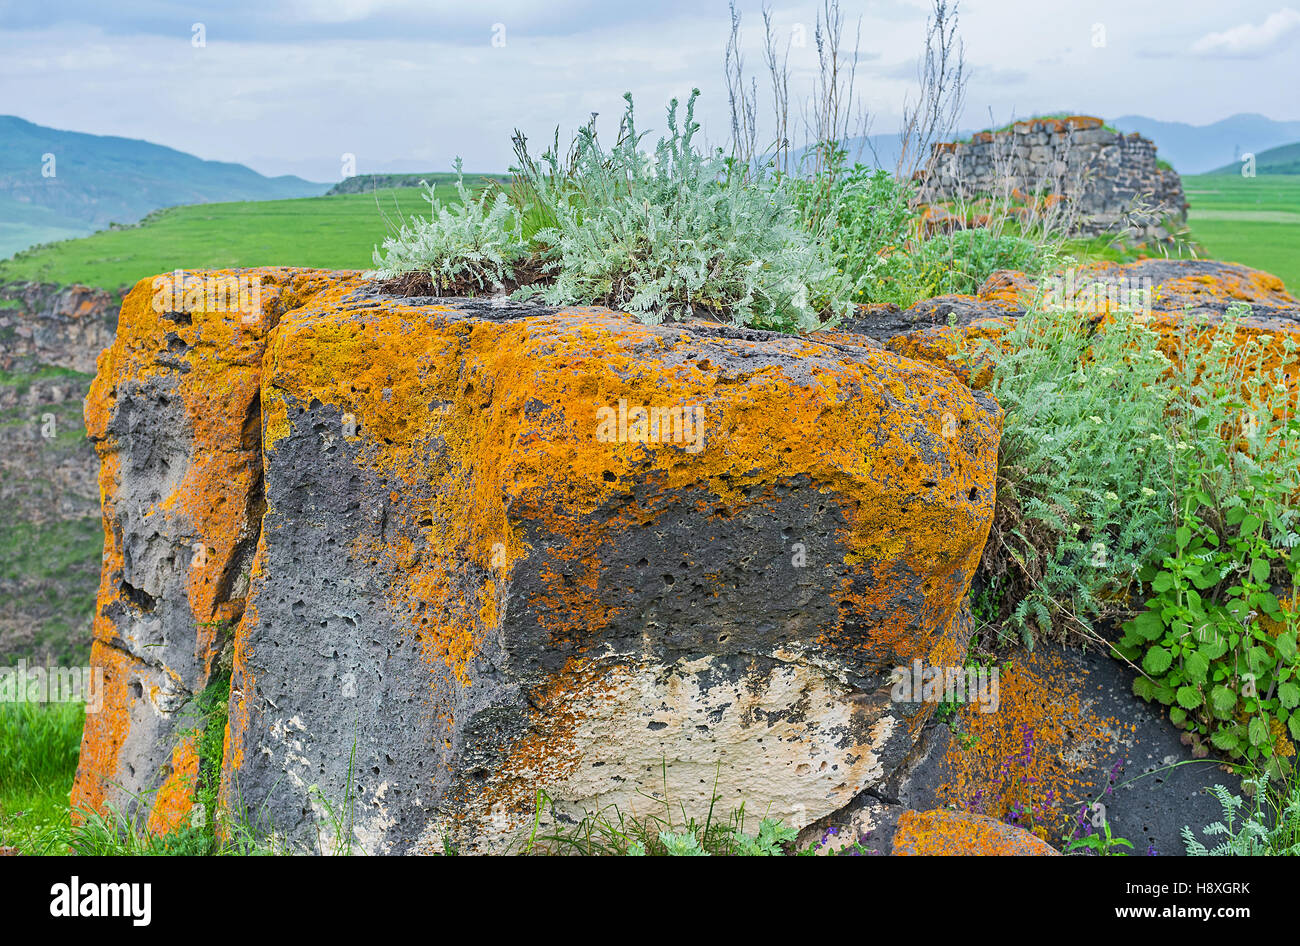 The colorful rocks with lichen, moss, grass and wildflowers, Saro, Georgia. Stock Photo